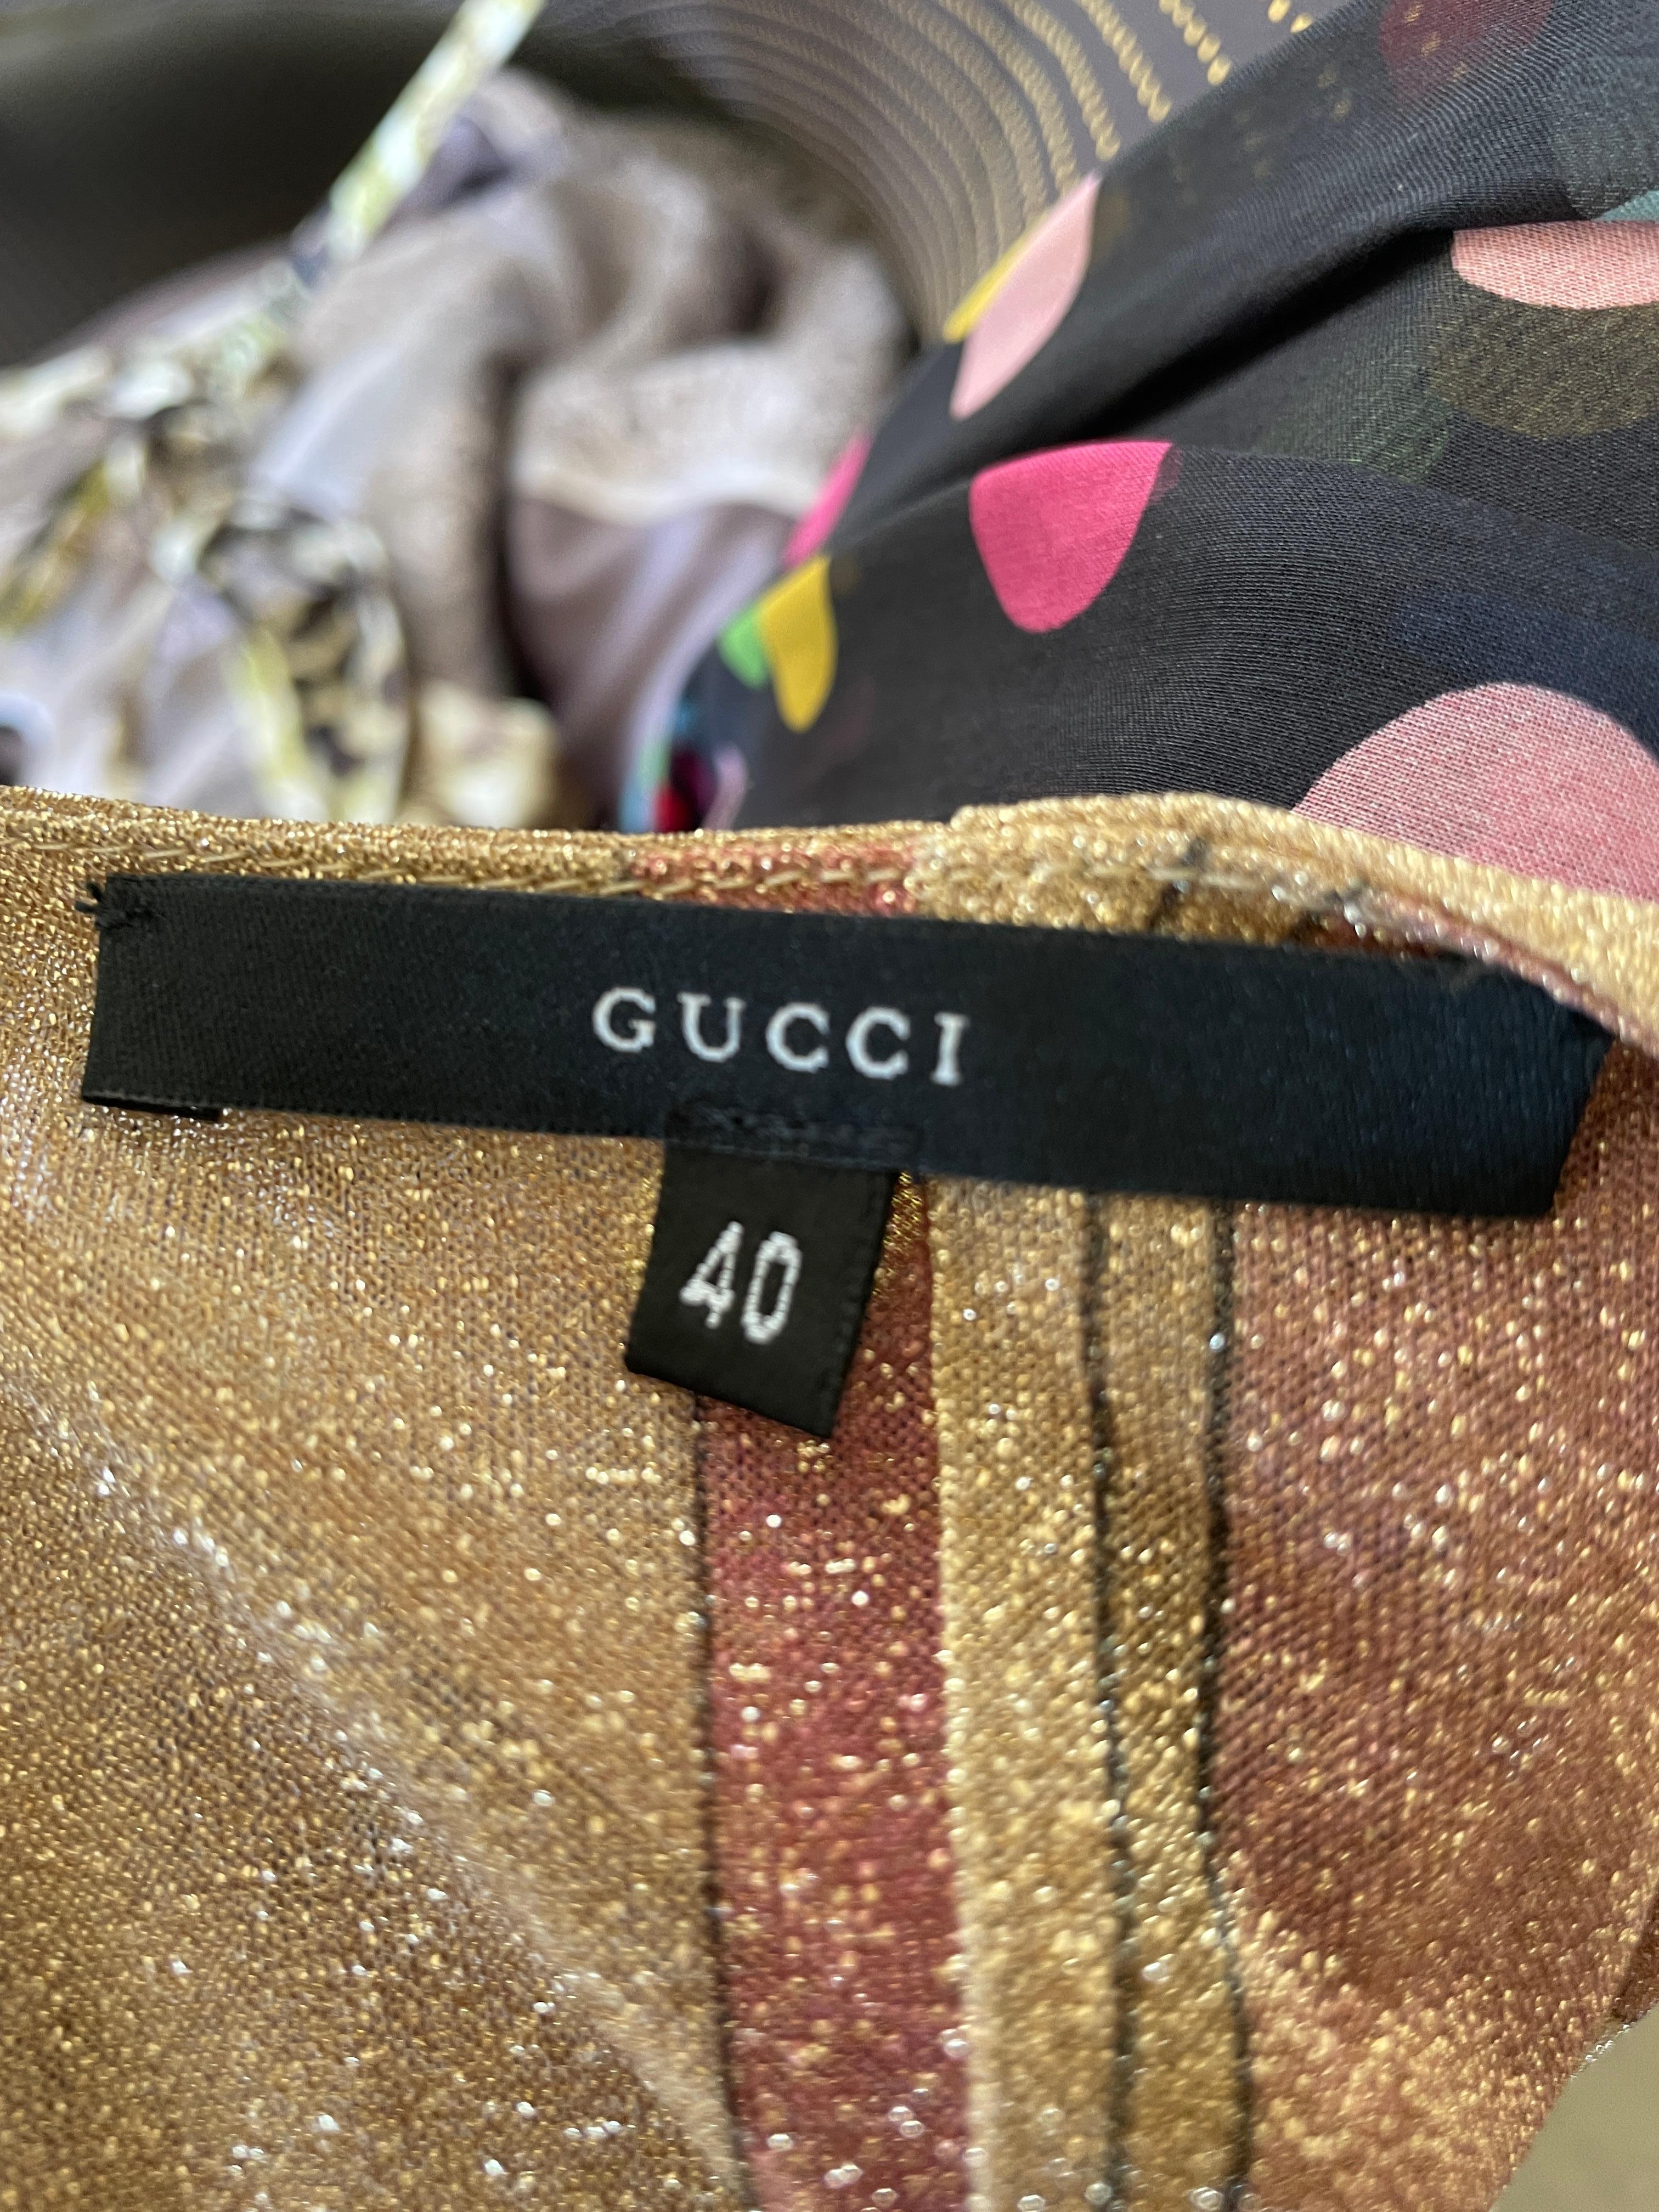 Gucci by Tom Ford Glittering Sheer Pink and Gold Top with Dragon Ornament For Sale 1